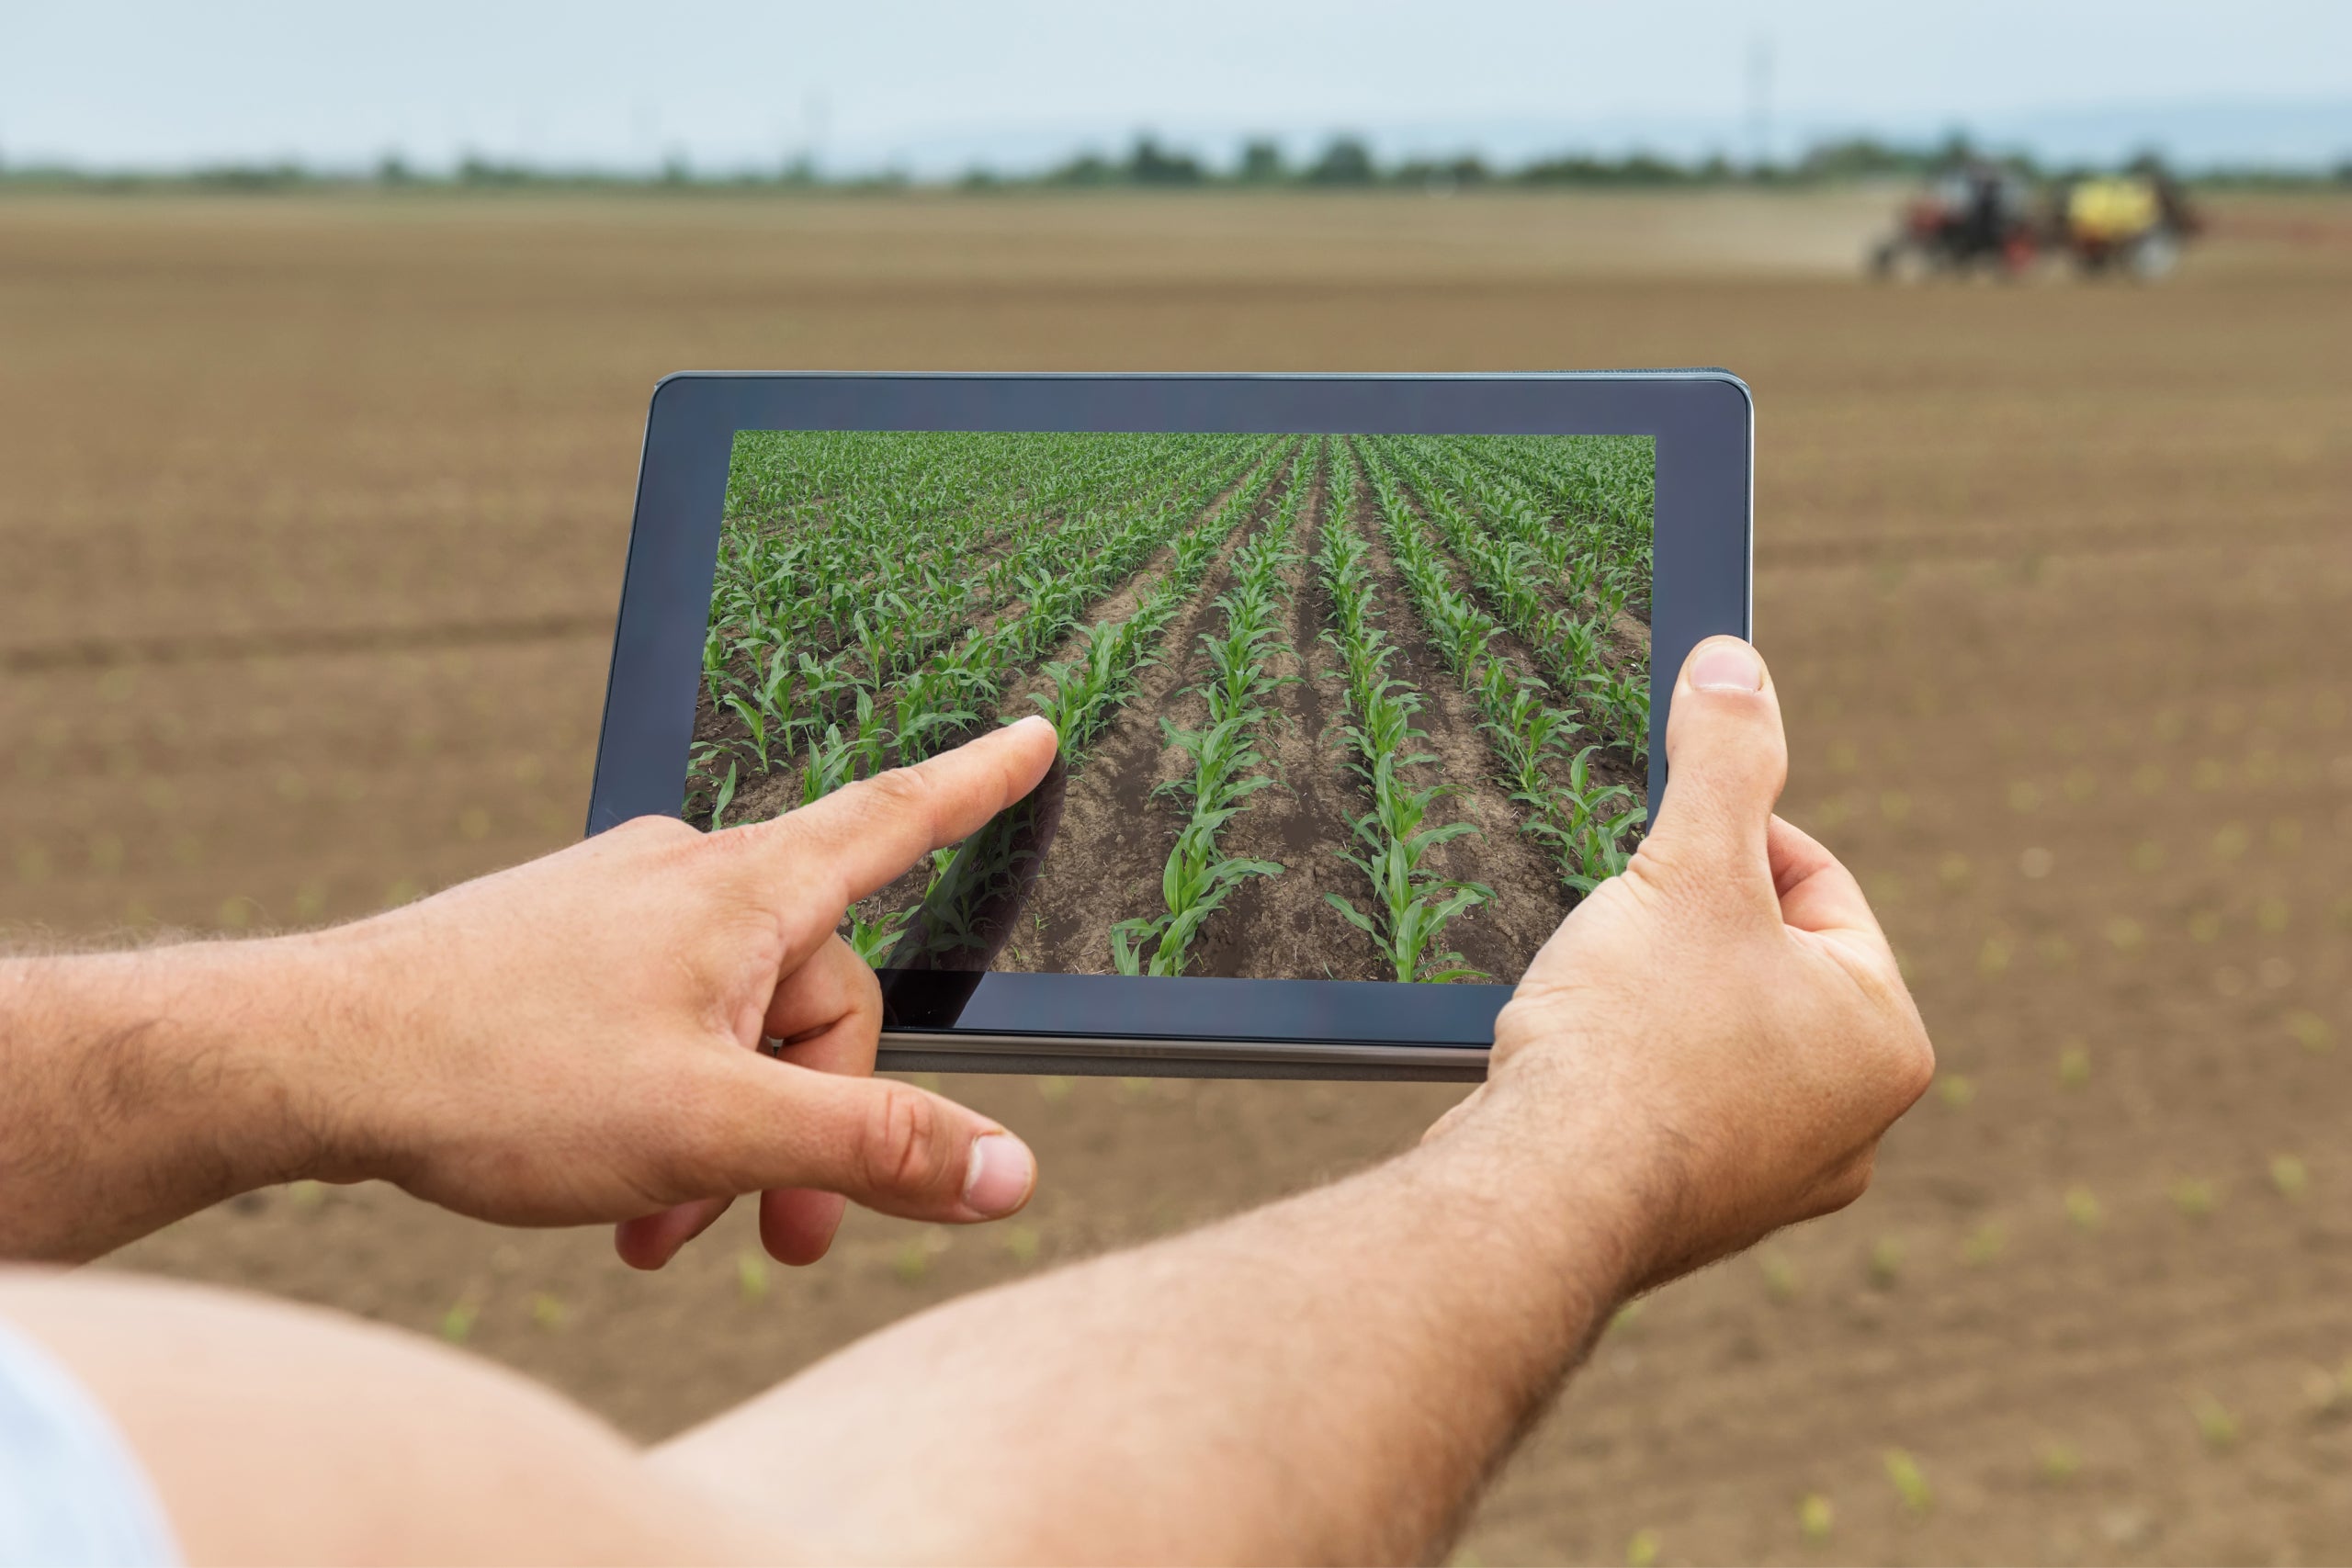 Digital technologies used in agriculture